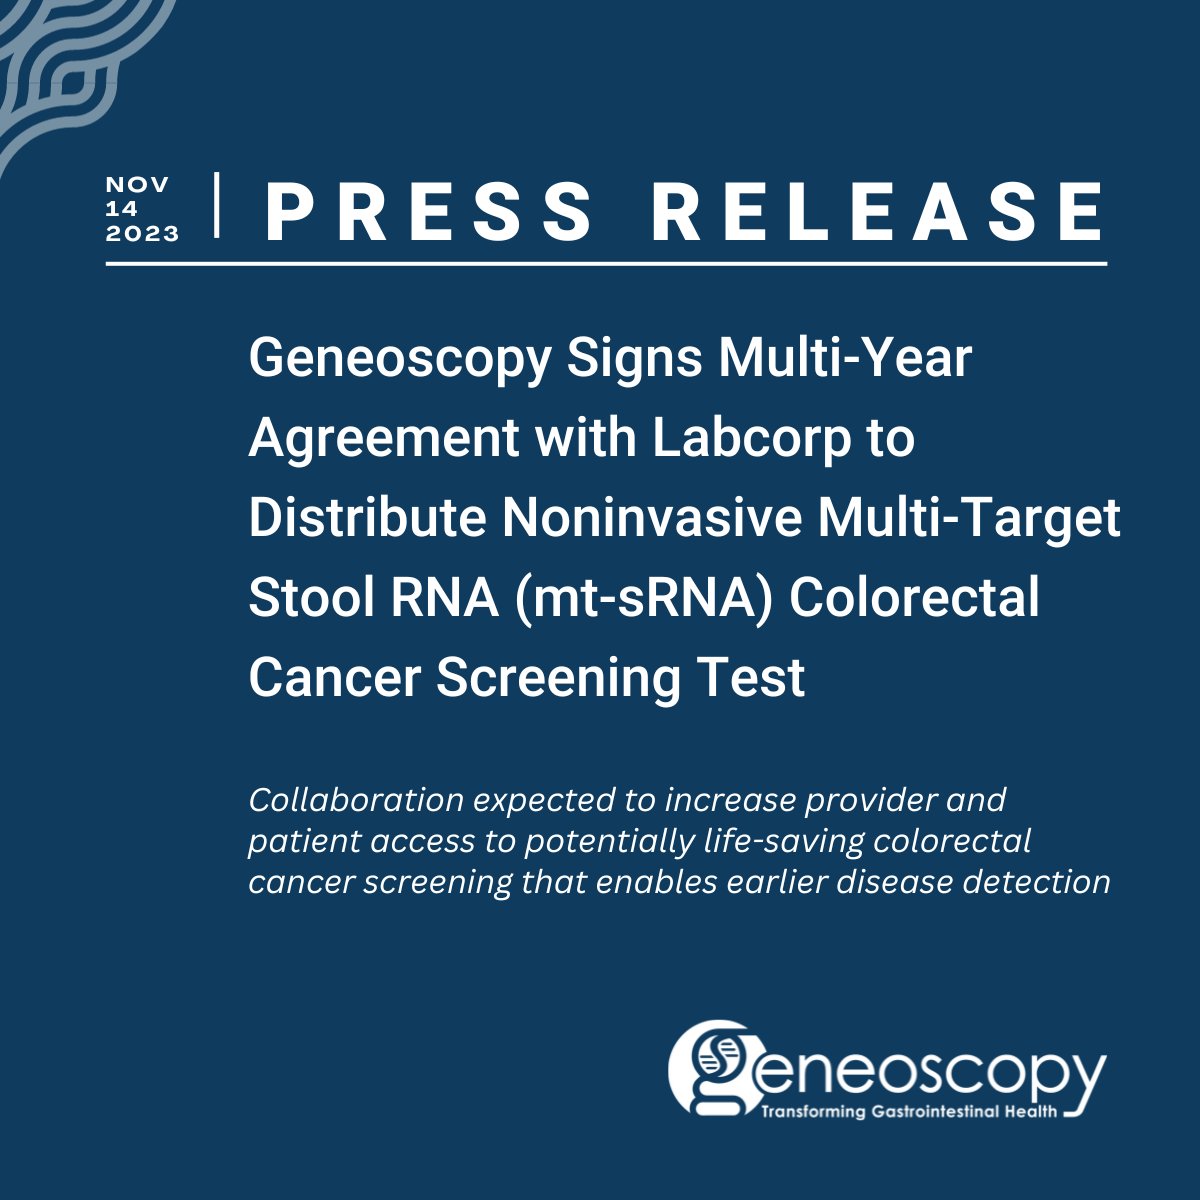 Geneoscopy is pleased to announce a strategic collaboration with @Labcorp to distribute our noninvasive, mt-sRNA colorectal cancer screening test upon approval, increasing access to potentially lifesaving screening for earlier disease detection. bit.ly/GeneoscopyandL… #GIHealth